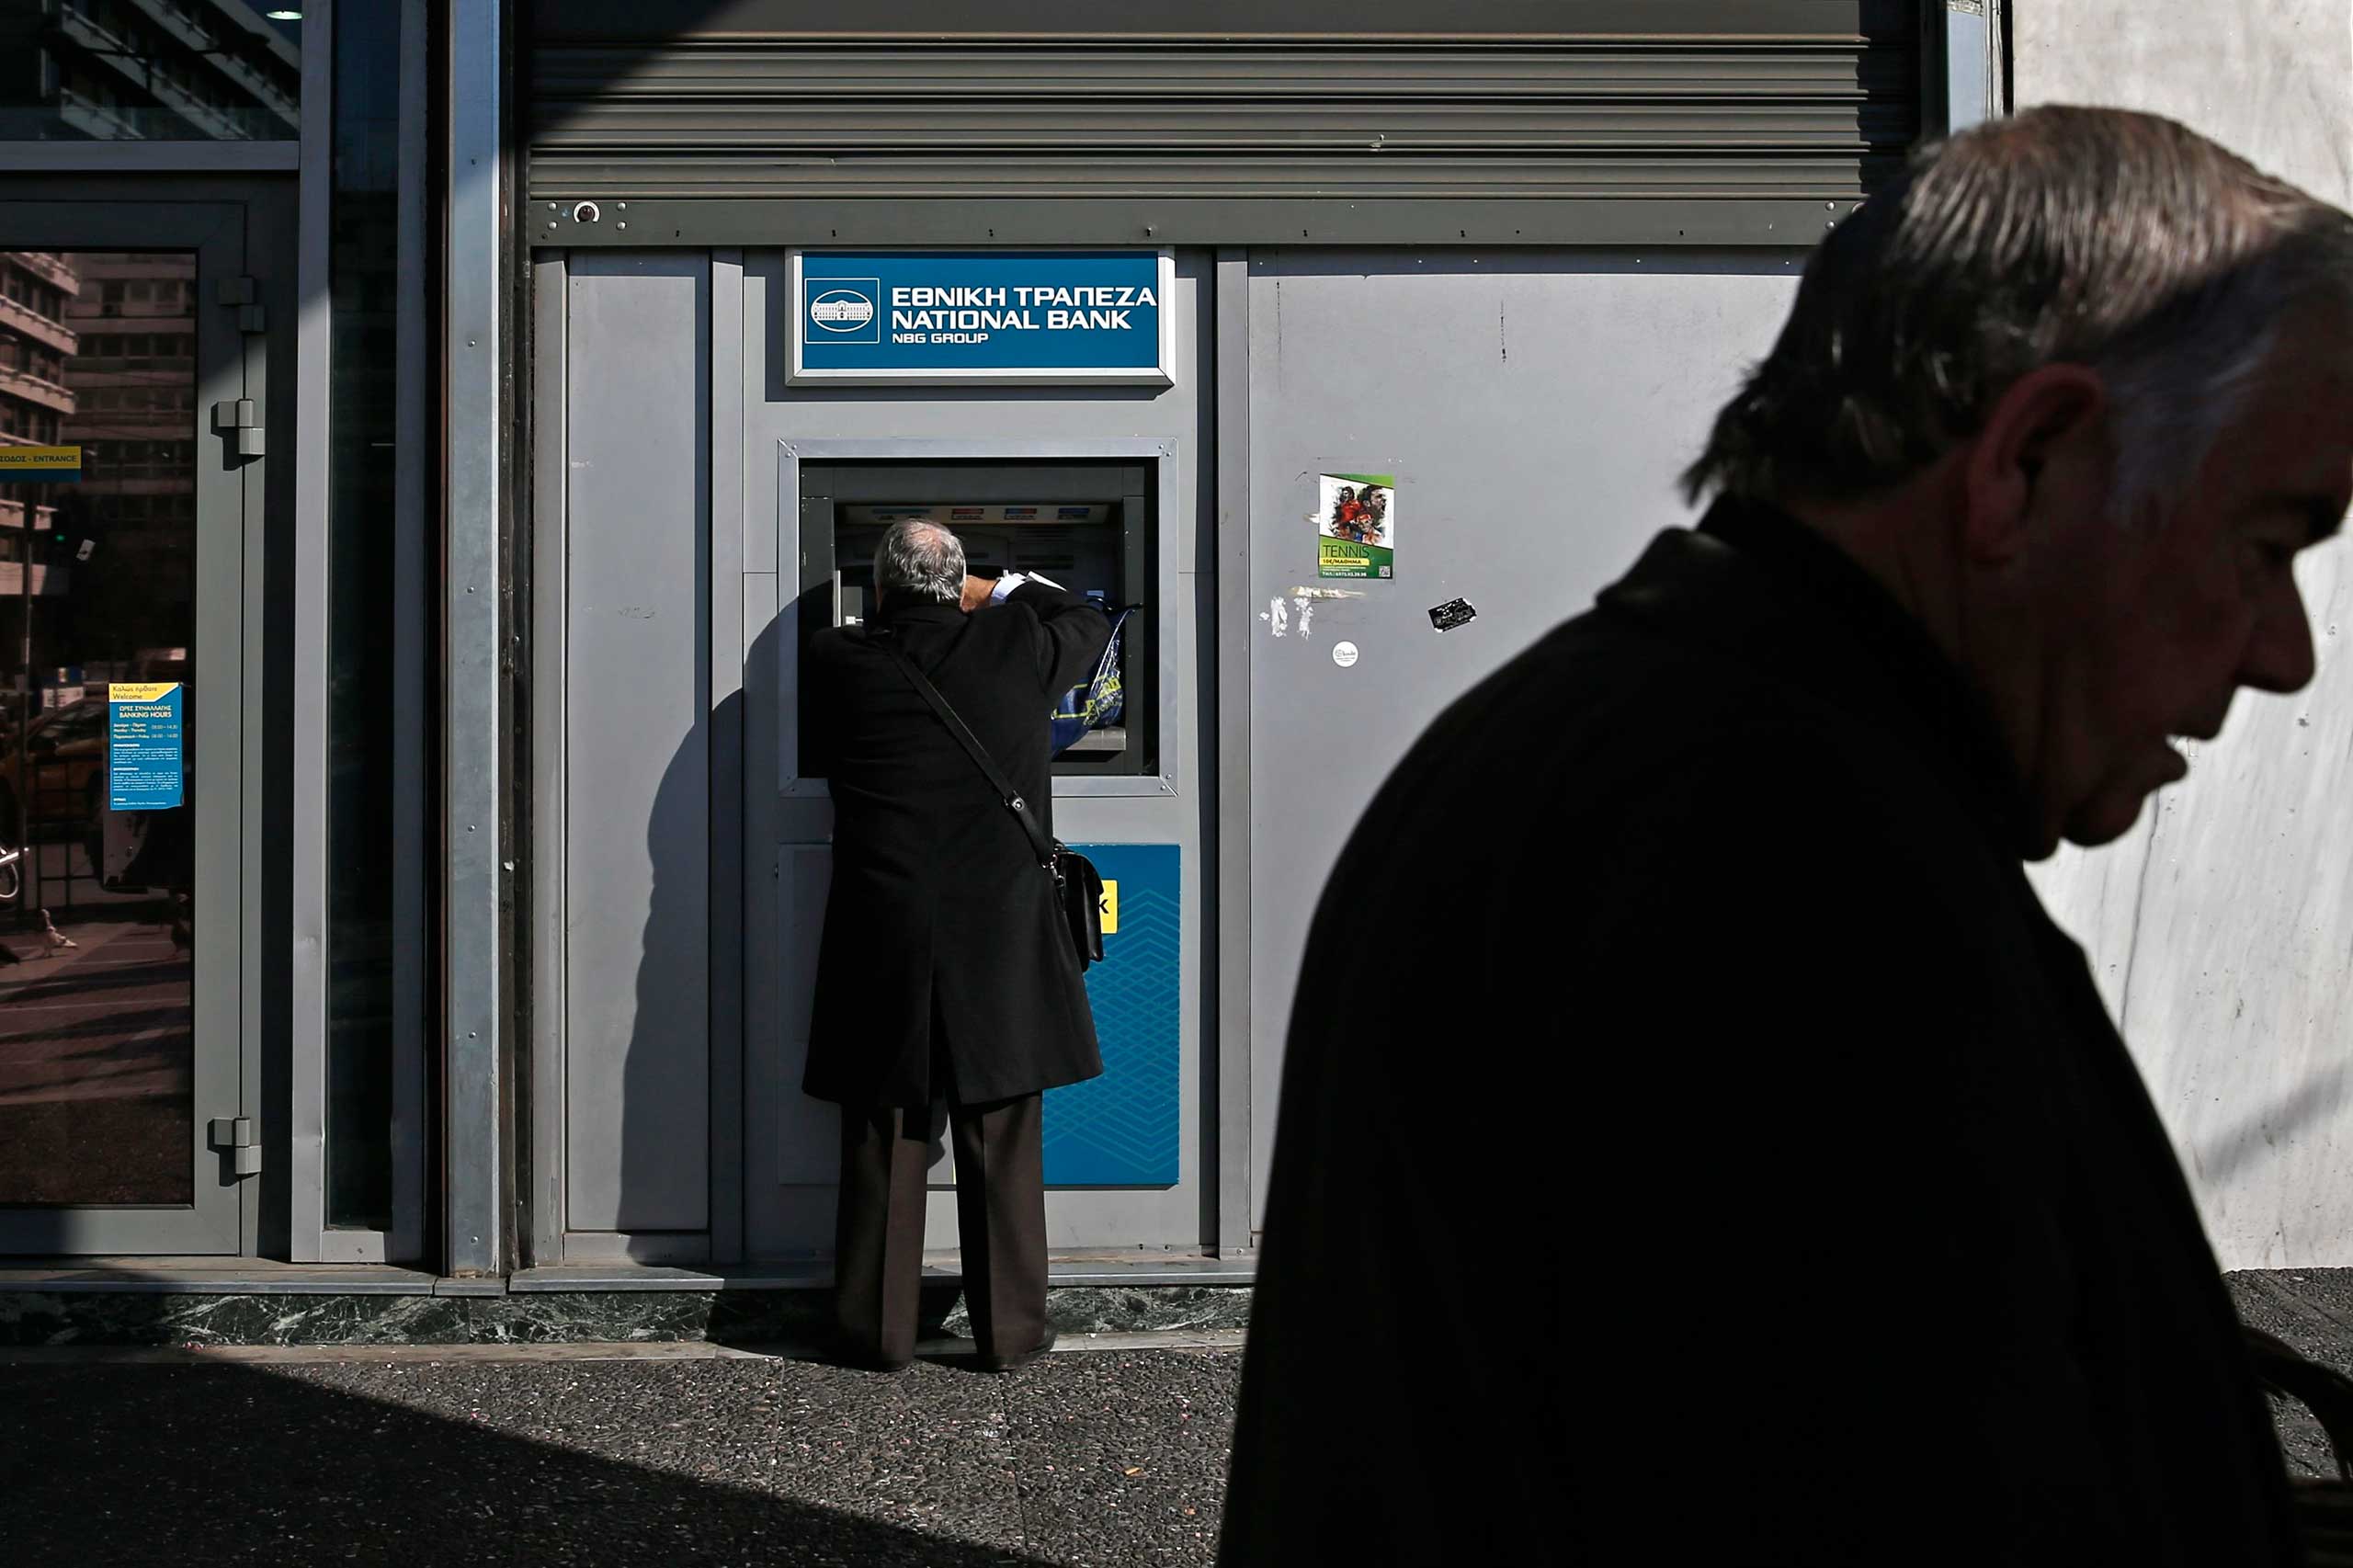 A man makes a transaction at an ATM outside a National Bank of Greece branch